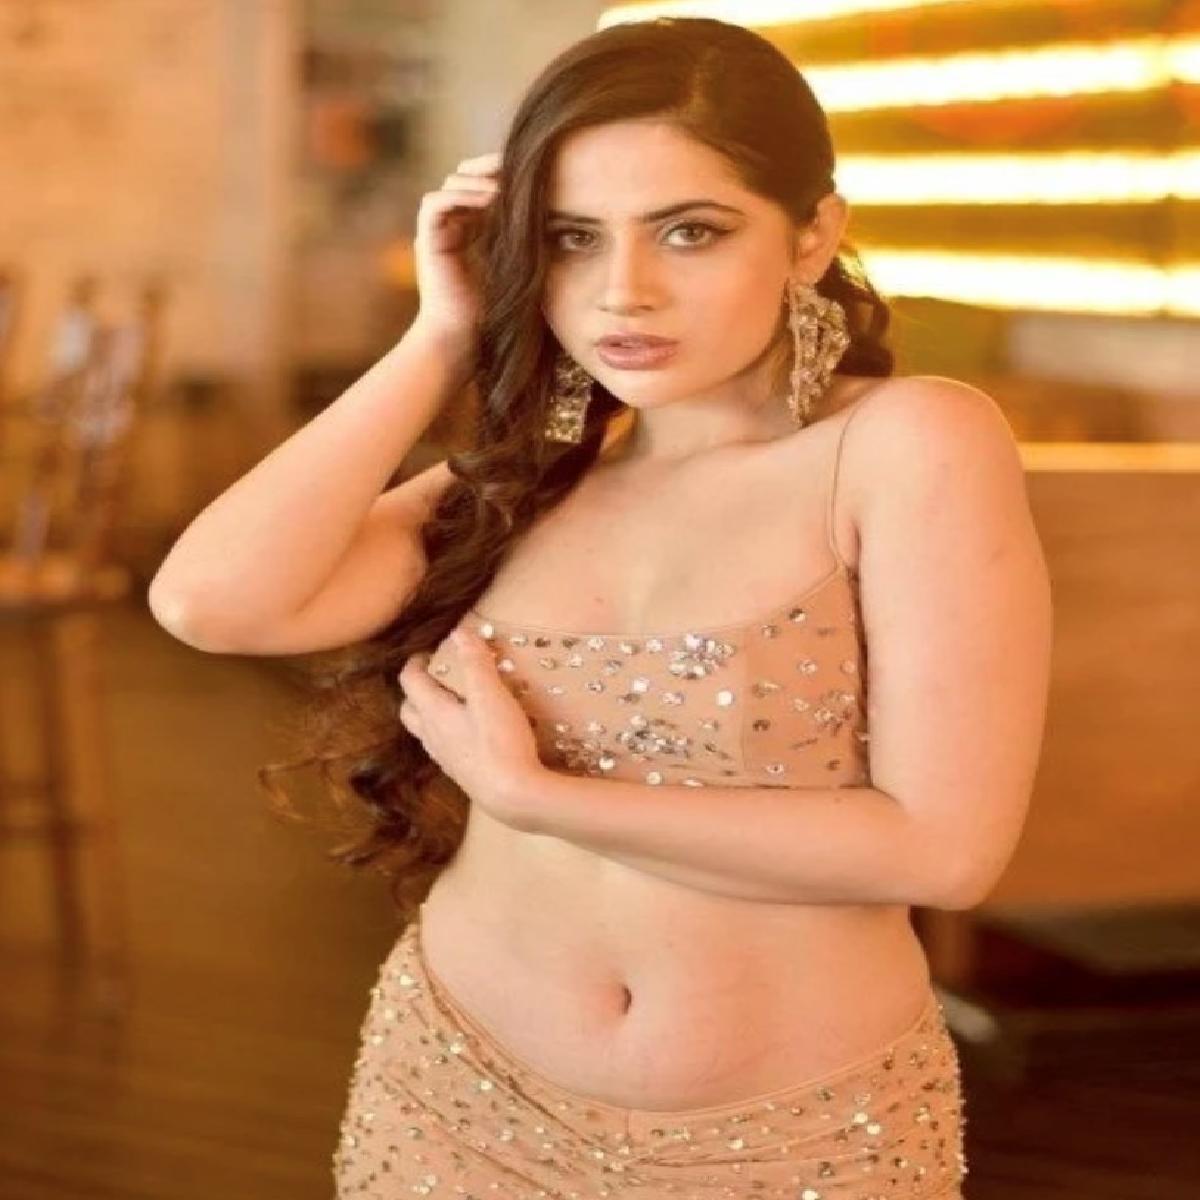 People Wants To See Me Naked But I Ain’t Going To Do It Says Urfi Javed